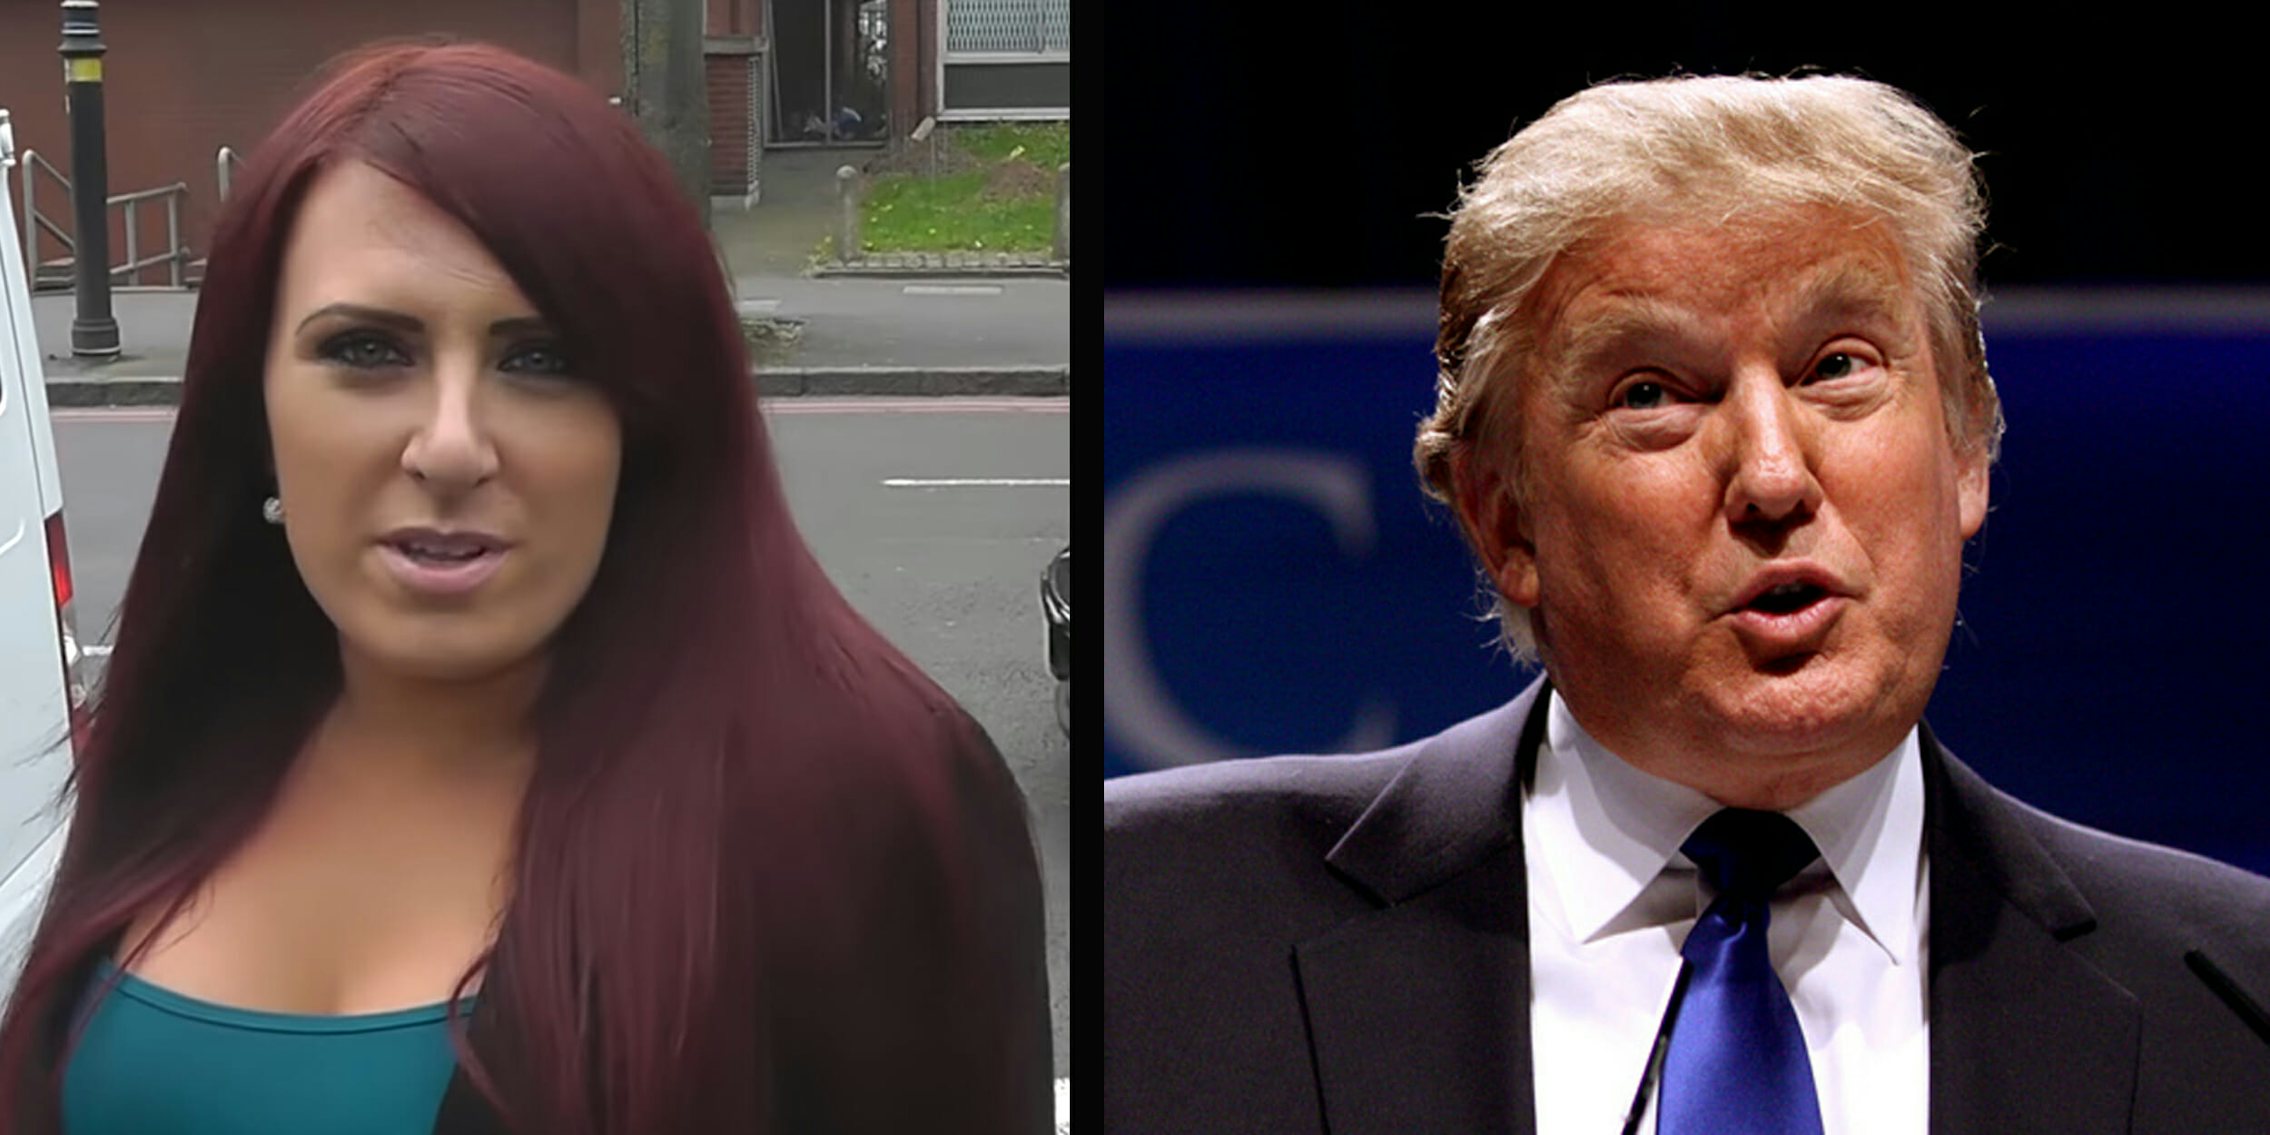 Who is Jayda Fransen, the far-right, anti-Muslim extremist who President Doanld Trump retweeted on Wednesday?